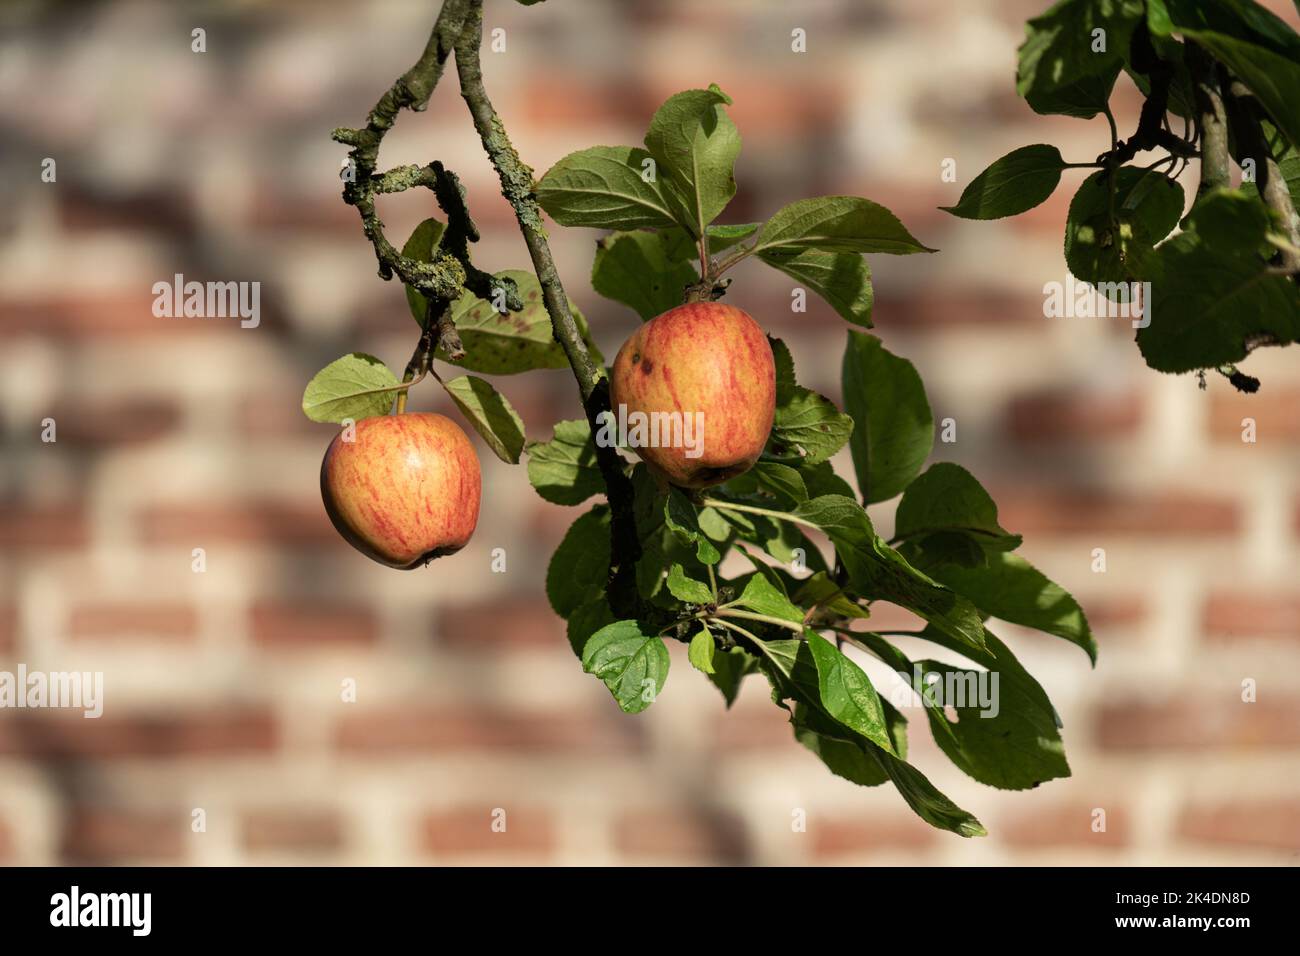 Traditional King of the Pippins apples hanging on a branch before a brick wall in the late summer sunlight Stock Photo